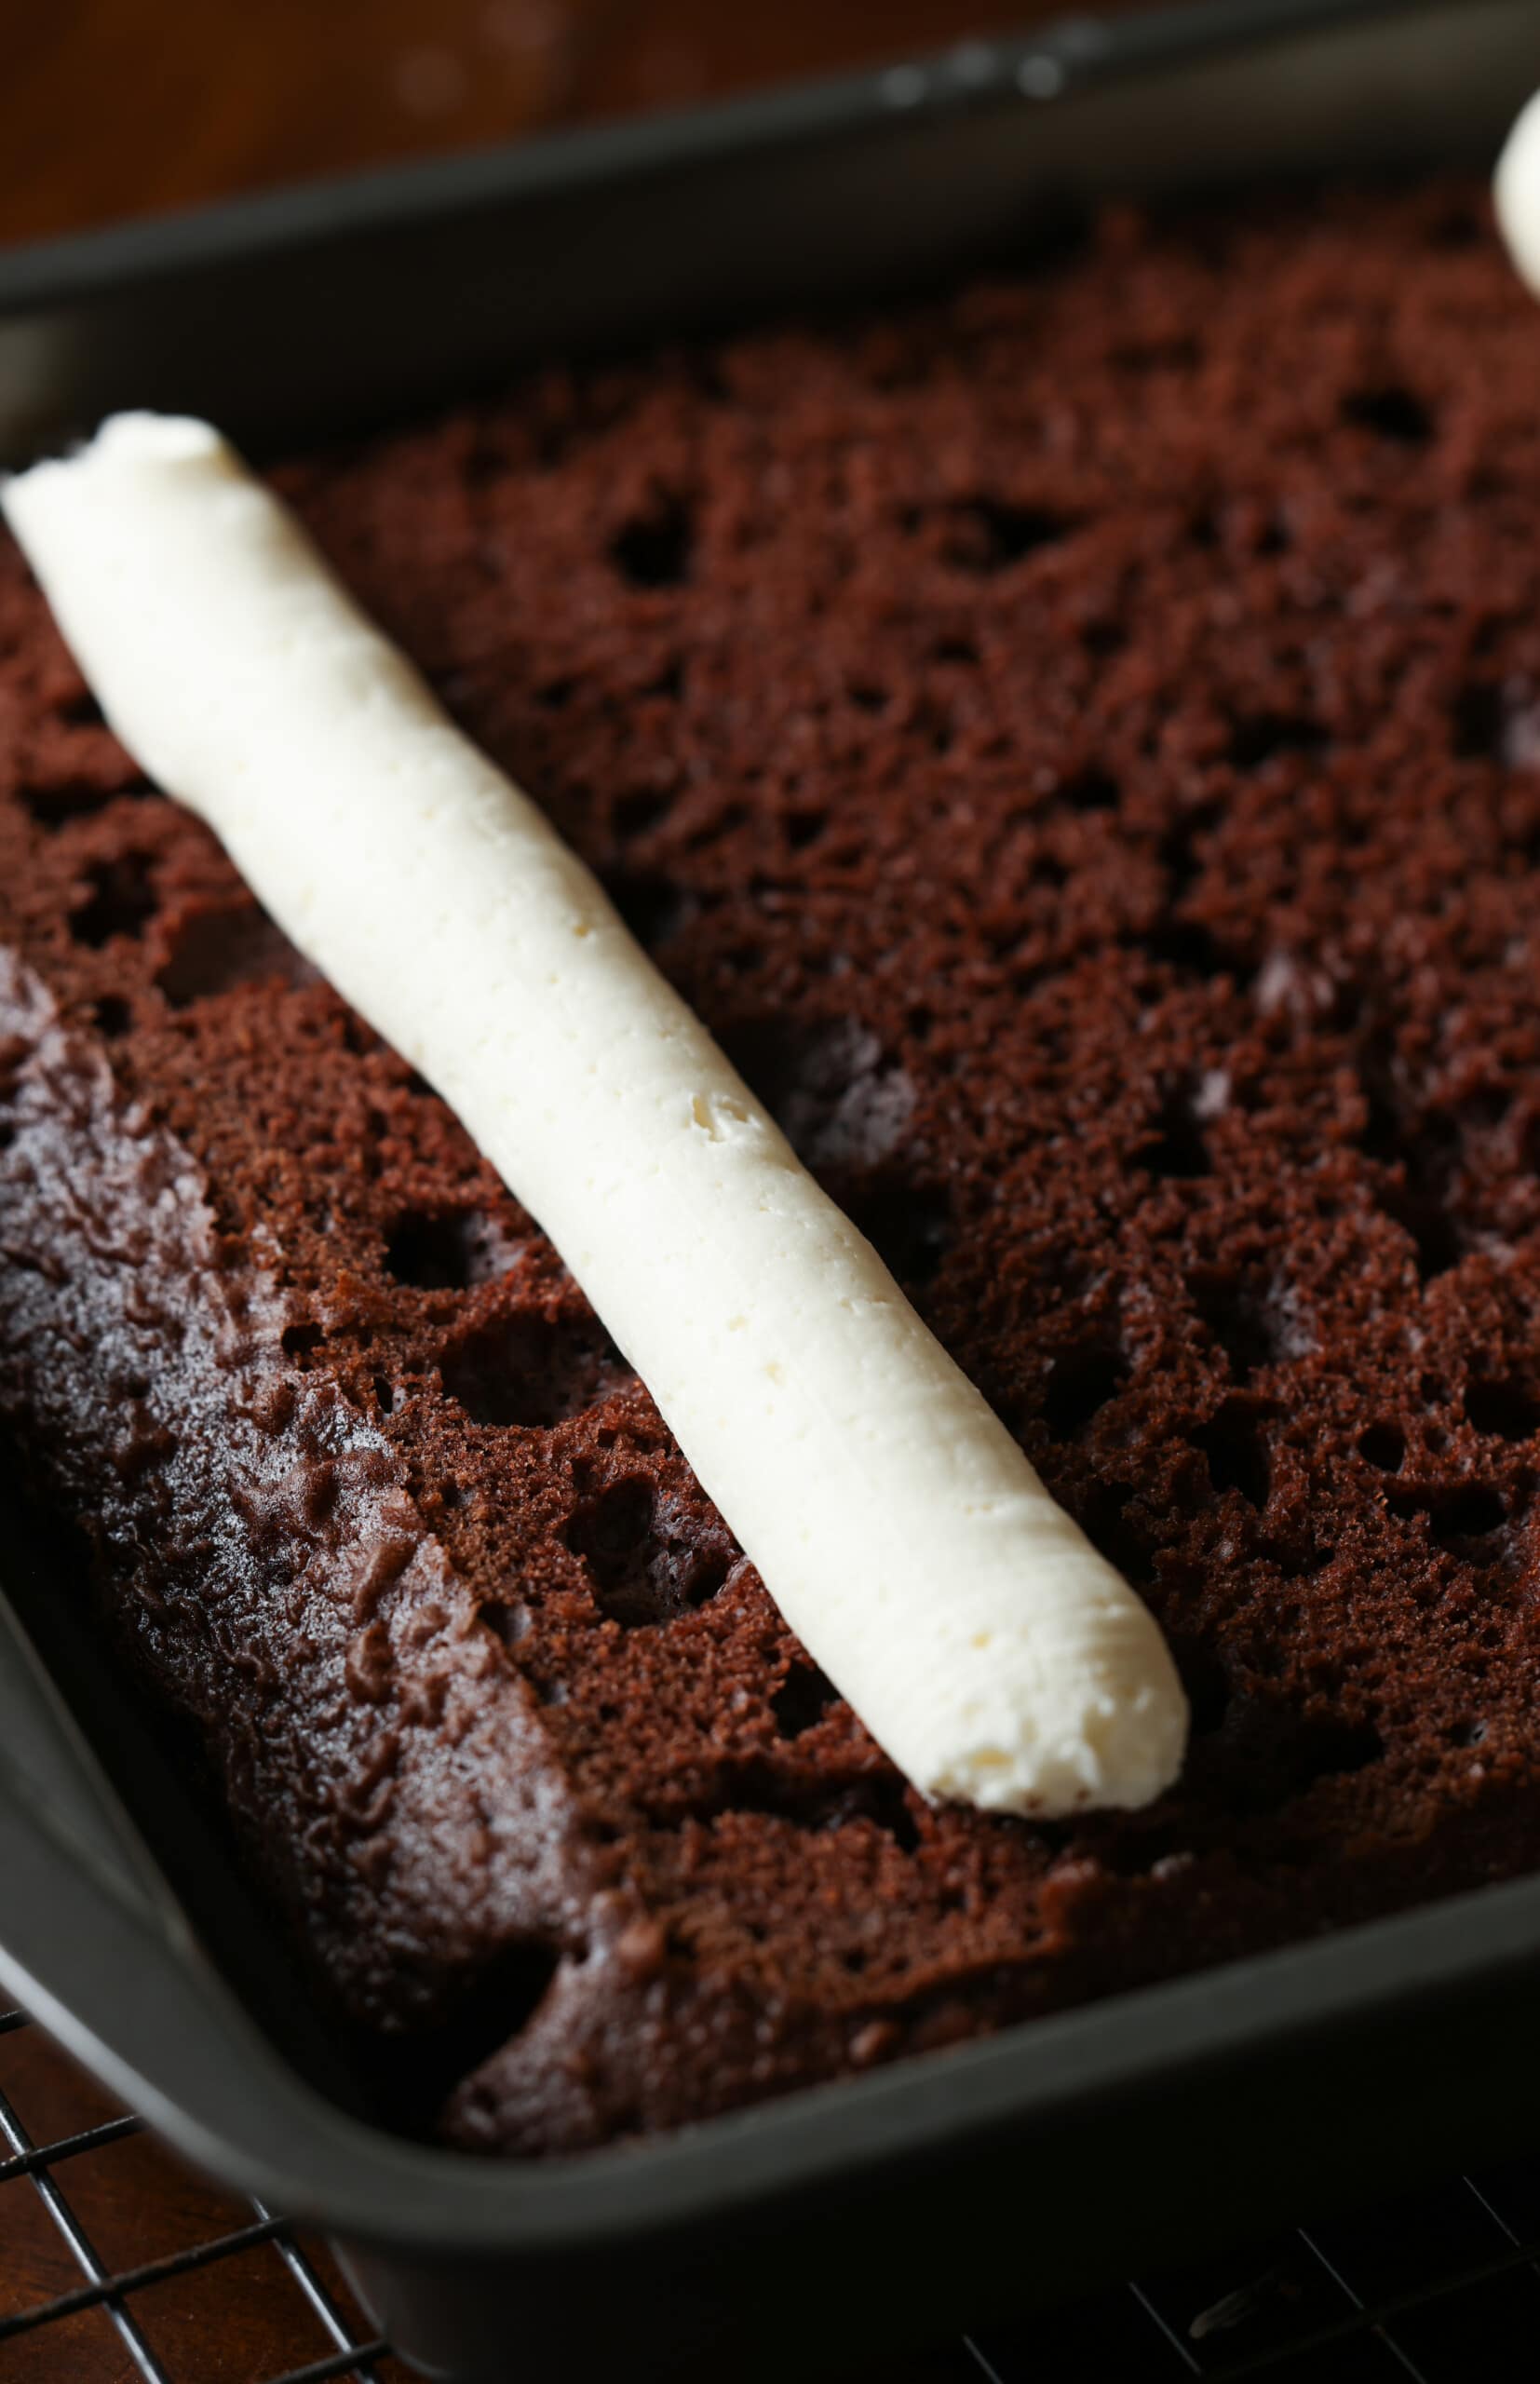 A piped tube of vanilla frosting on top of chocolate cake